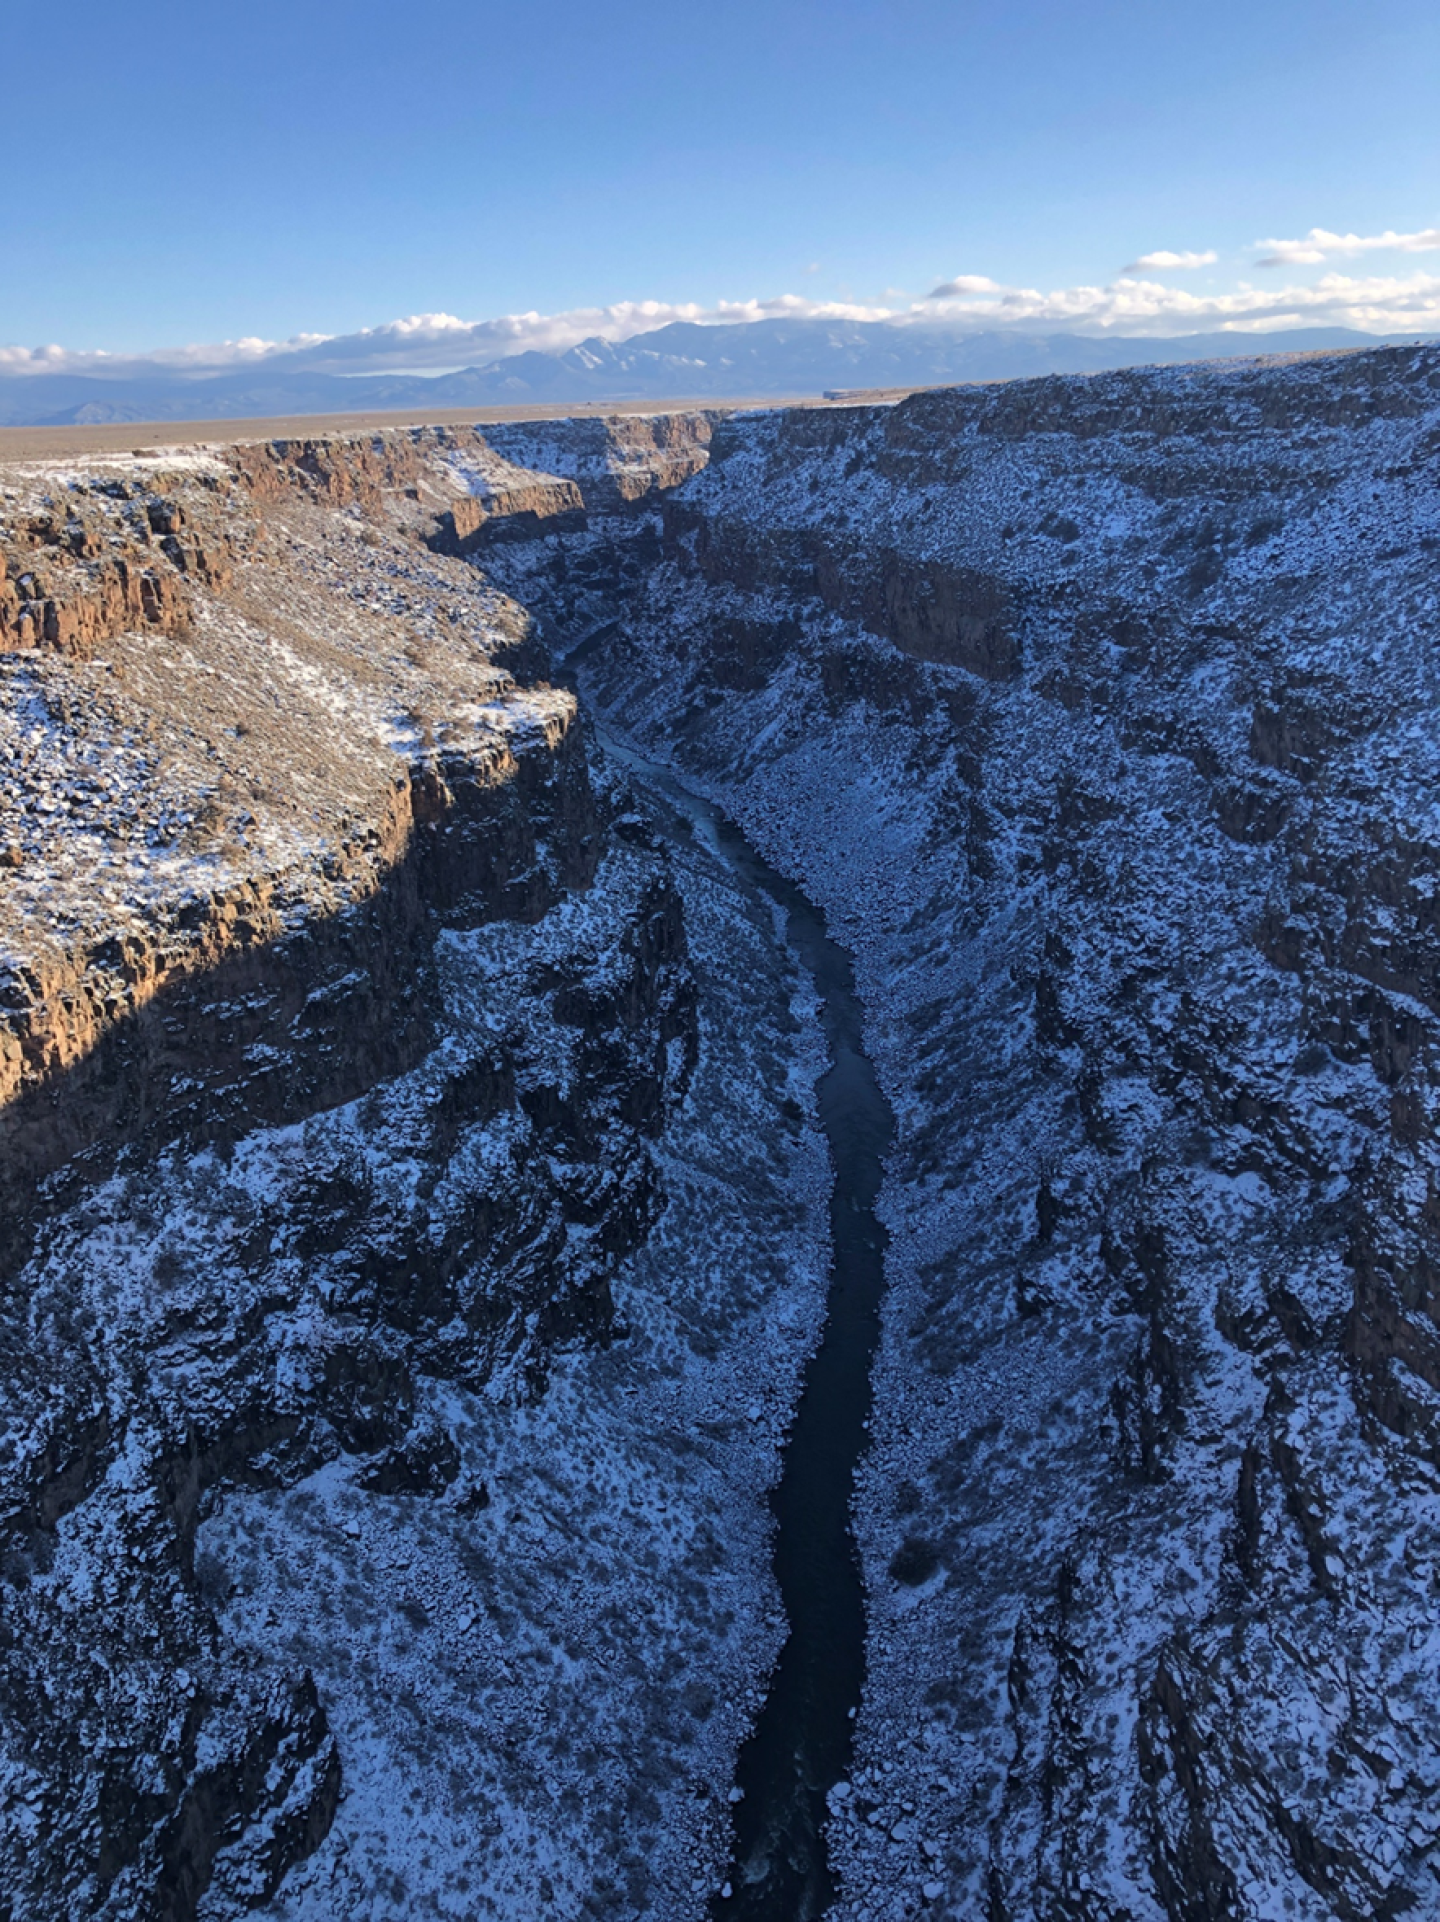 Looking south from the Rio Grande Gorge Bridge